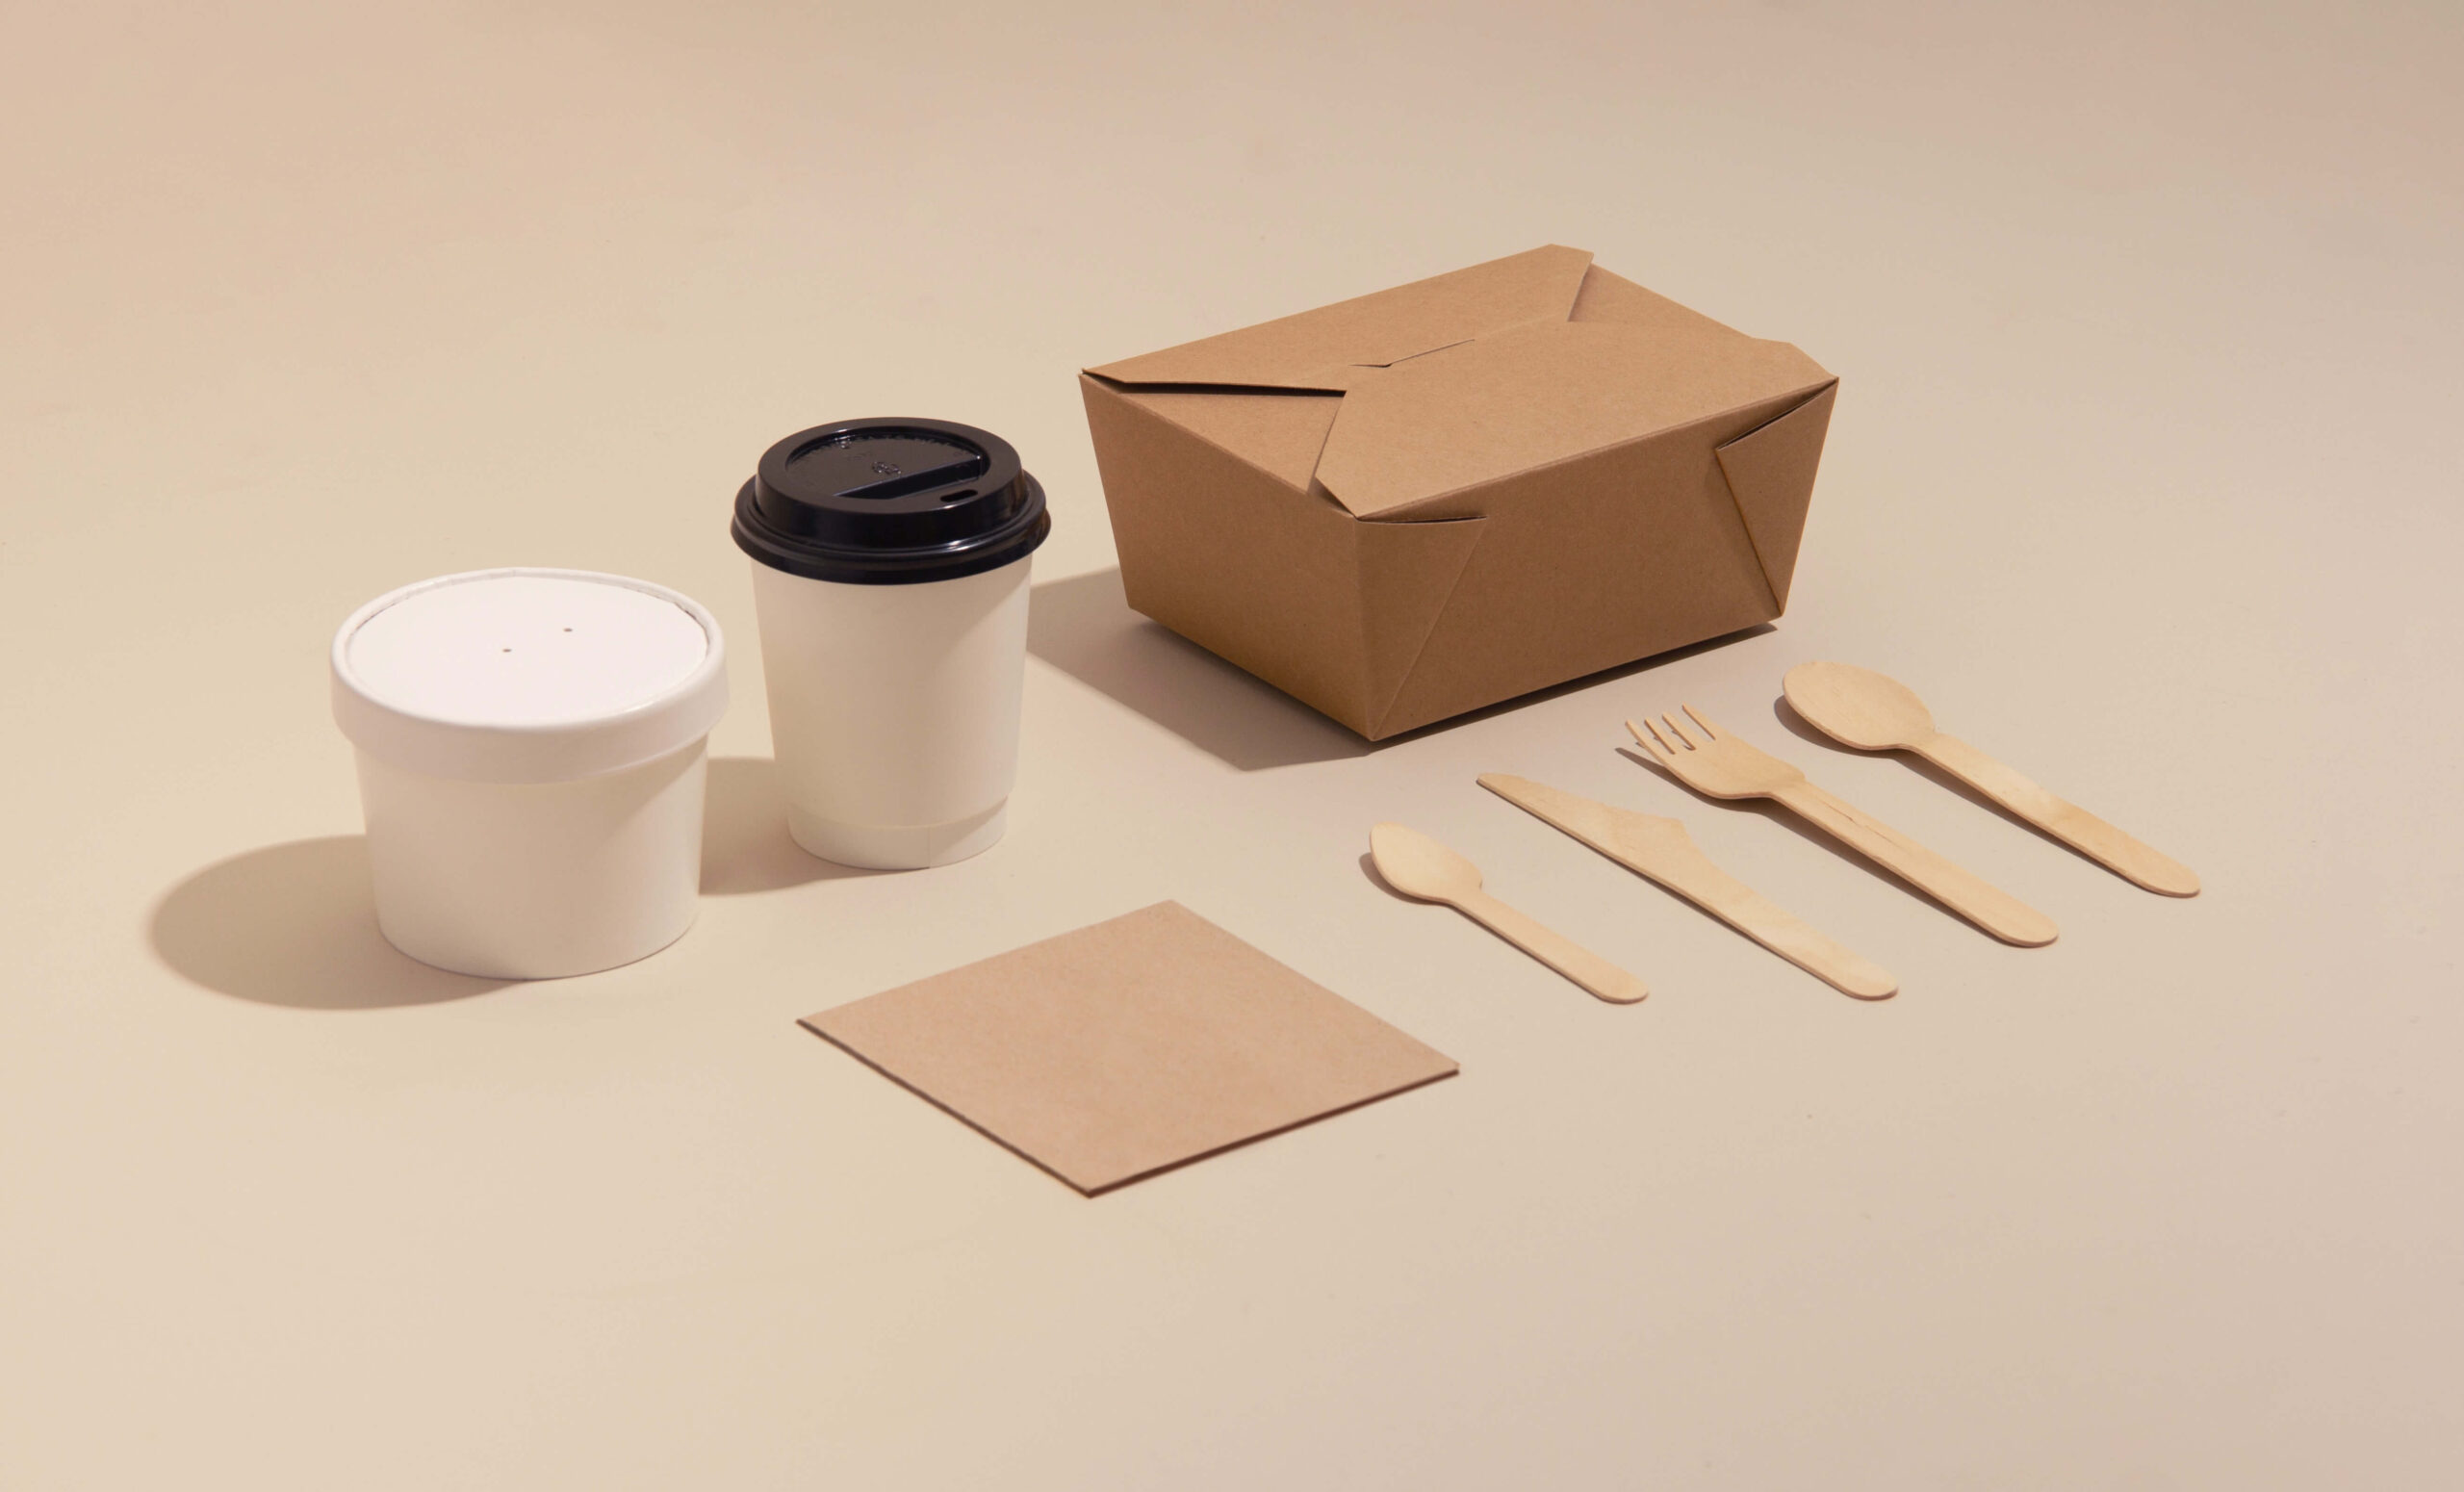 cardboard boxes in different shapes, 1 cardboard glass and wooden spoons lying on a flat surface